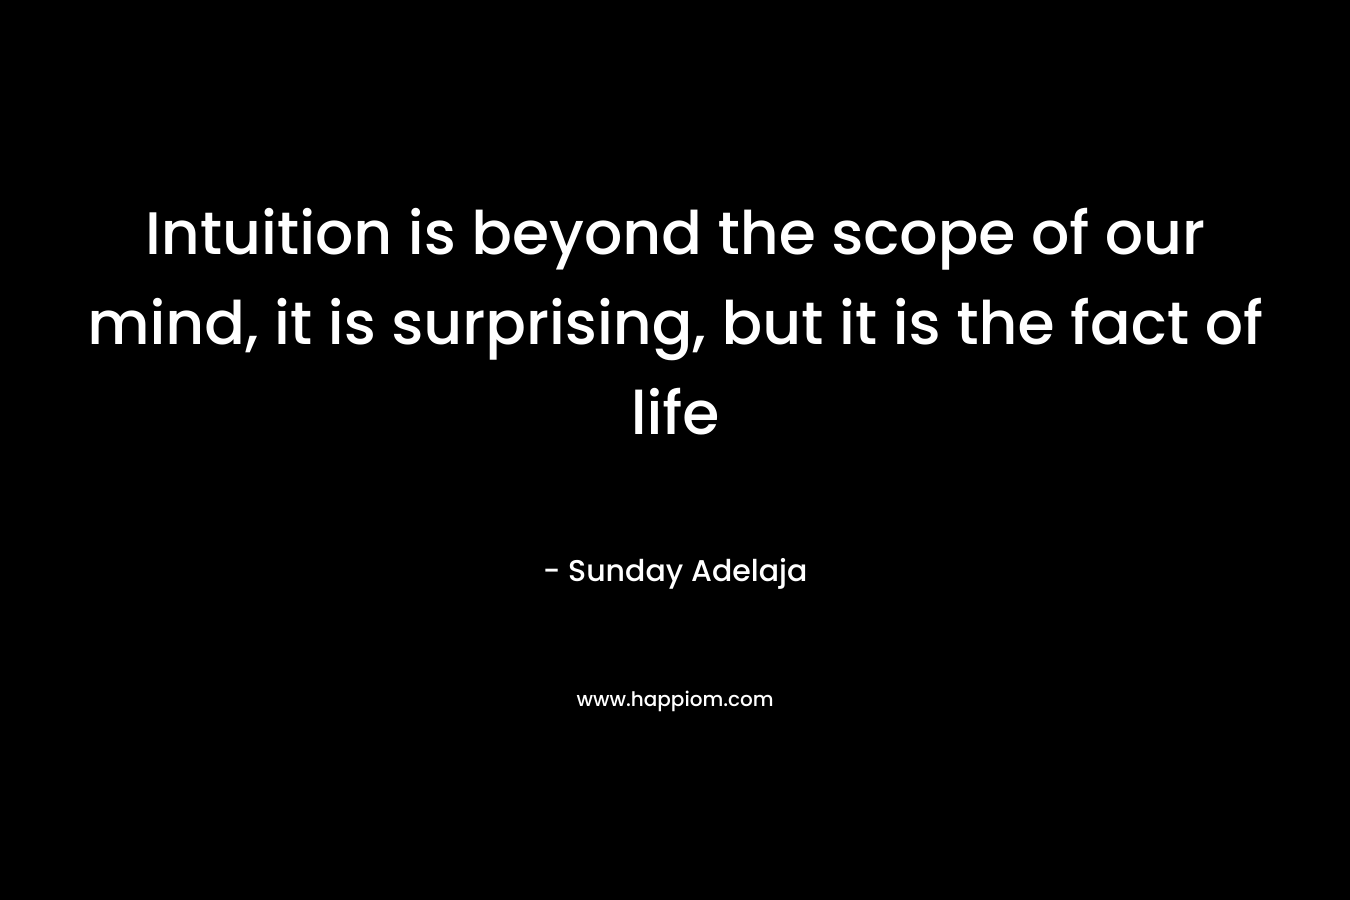 Intuition is beyond the scope of our mind, it is surprising, but it is the fact of life